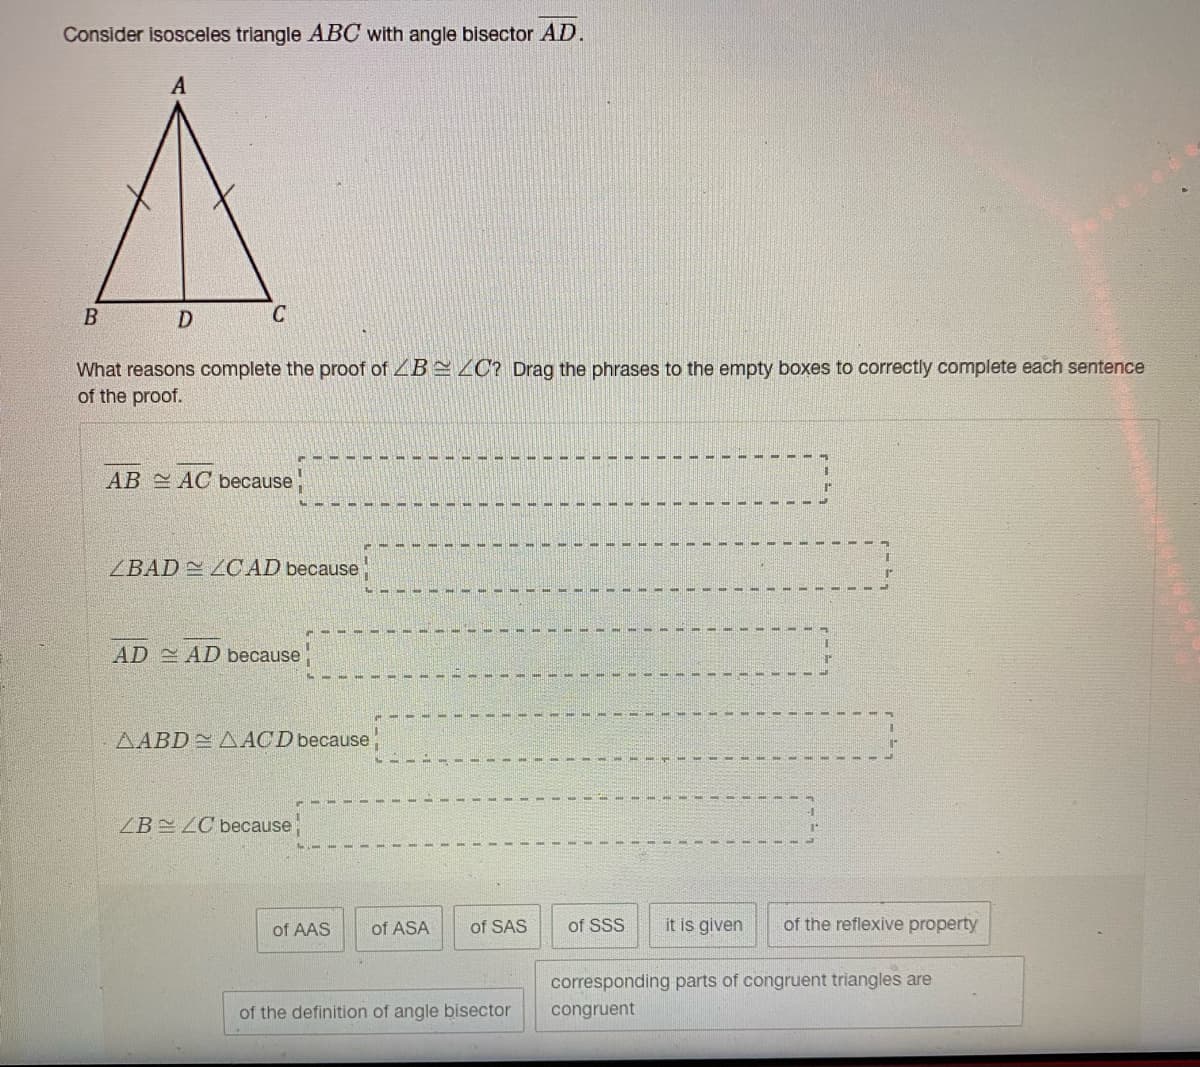 Consider isosceles triangle ABC with angle bisector AD.
D
C
What reasons complete the proof of ZB ZC? Drag the phrases to the empty boxes to correctly complete each sentence
of the proof.
AB AC because
ZBAD LCAD because
AD AD because
AABD A ACD because
ZB LC because
of AAS
of ASA
of SAS
of SSS
it is given
of the reflexive property
corresponding parts of congruent triangles are
of the definition of angle bisector
congruent
